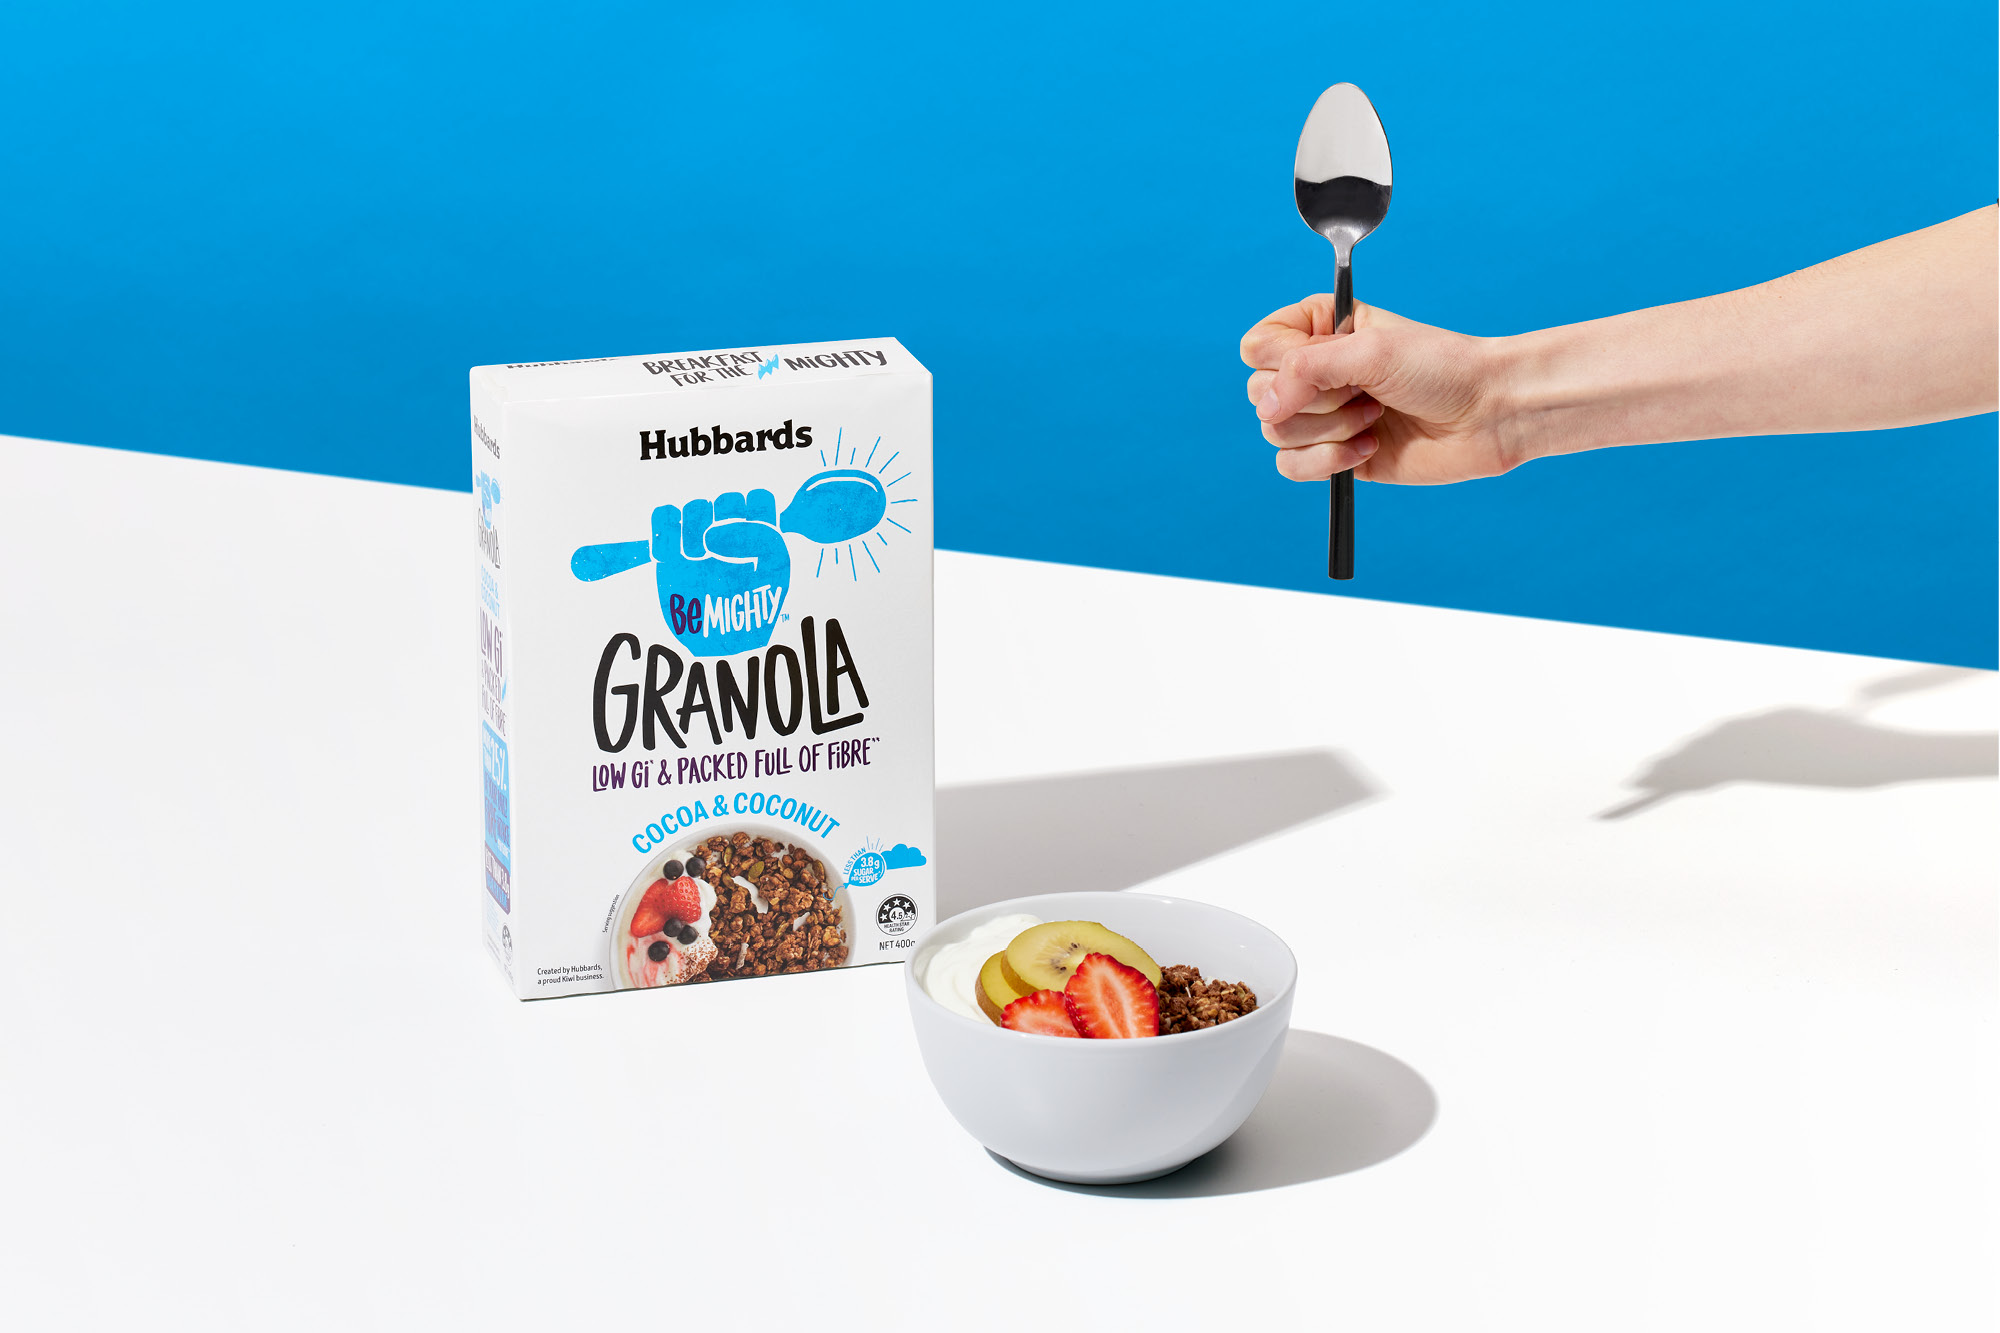 onfire hubbards be mighty granola packaging design 18